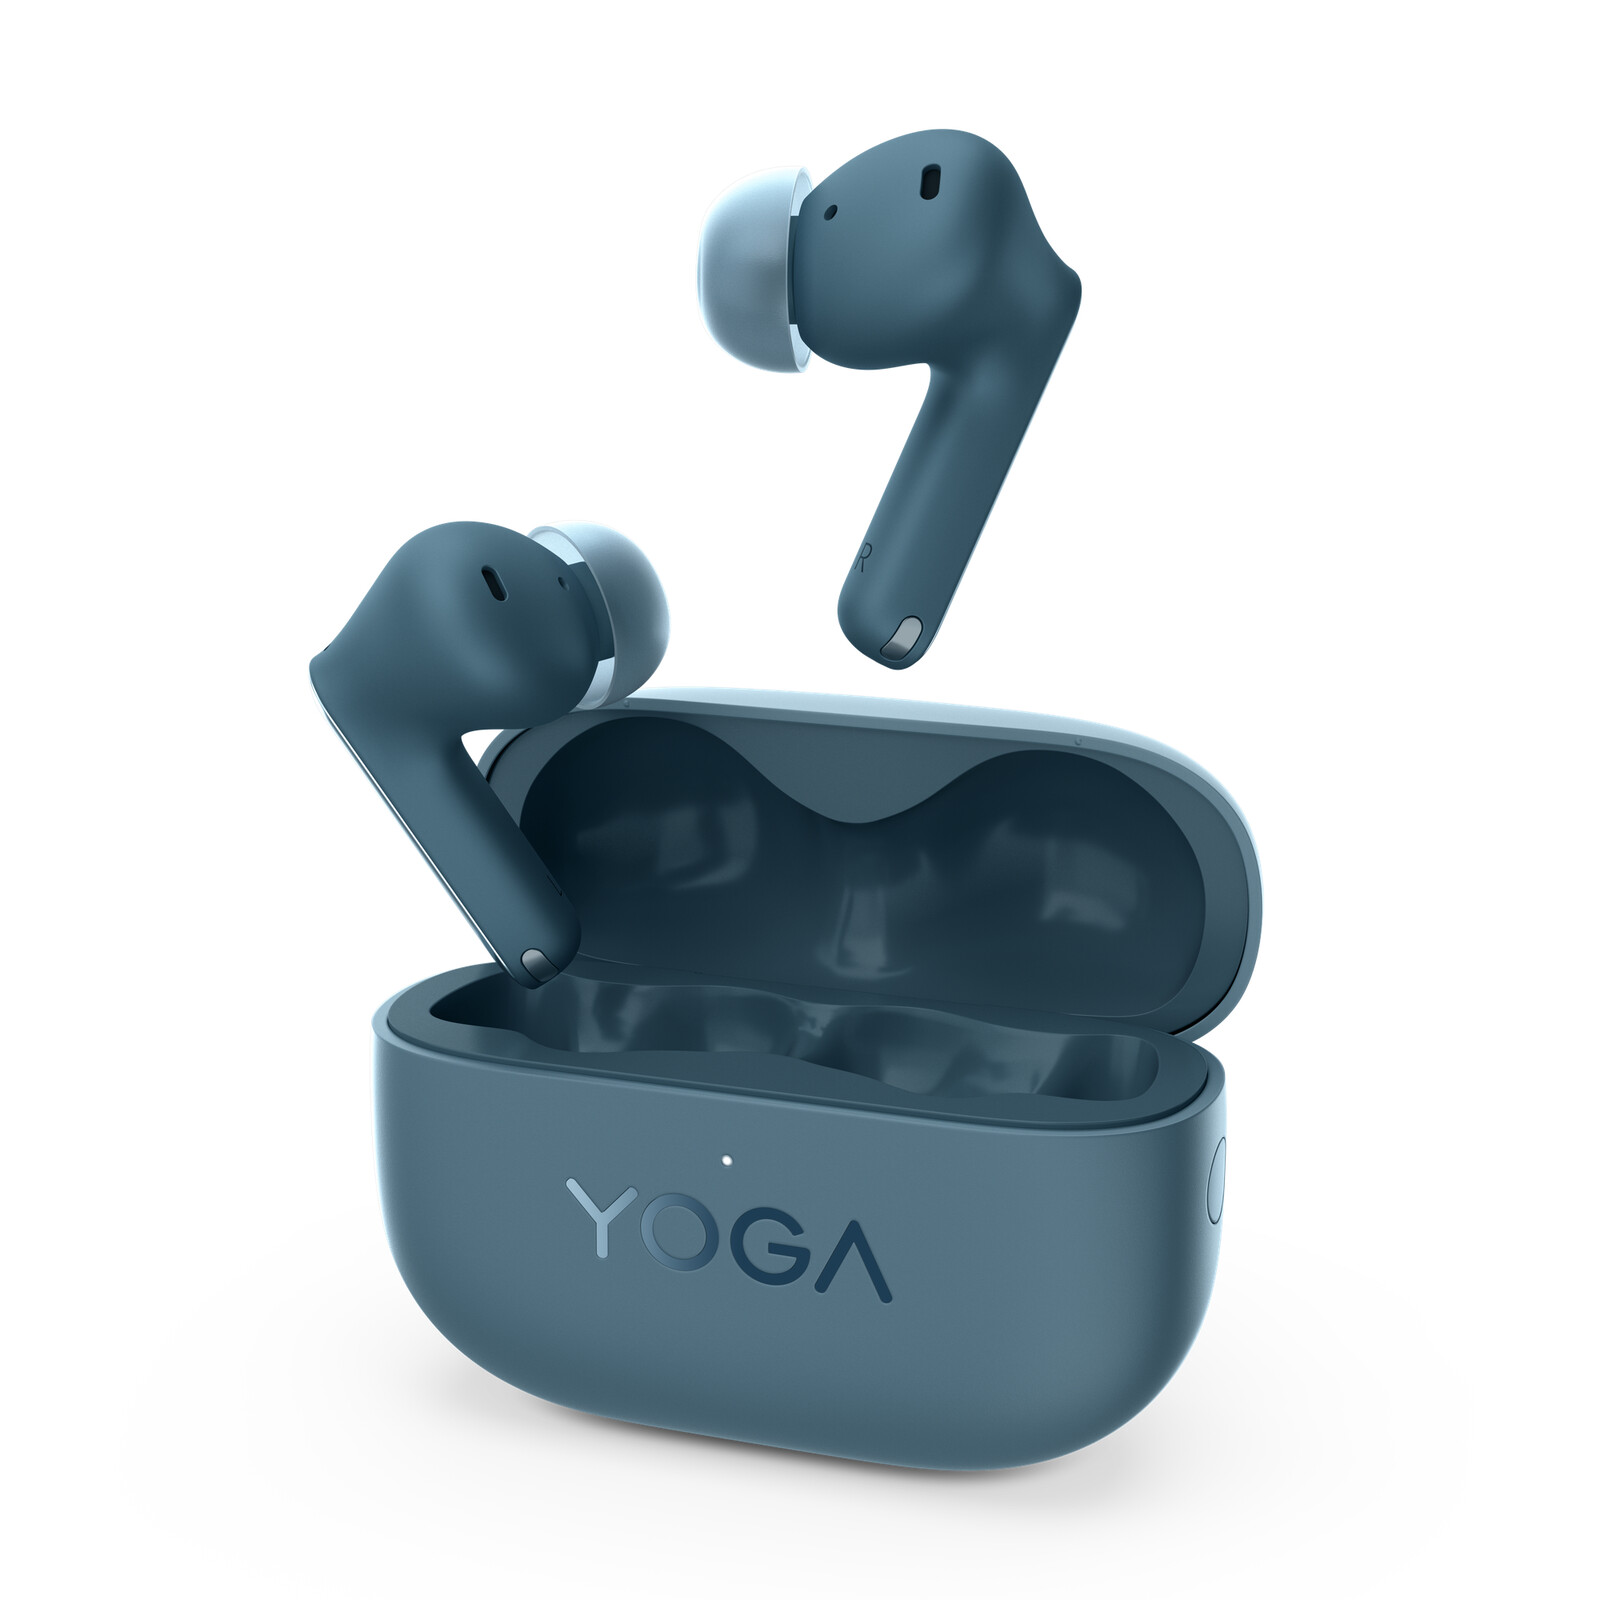 Lenovo Yoga True Wireless Stereo Earbuds debut as new Yoga PC companion for  $69.99 -  News